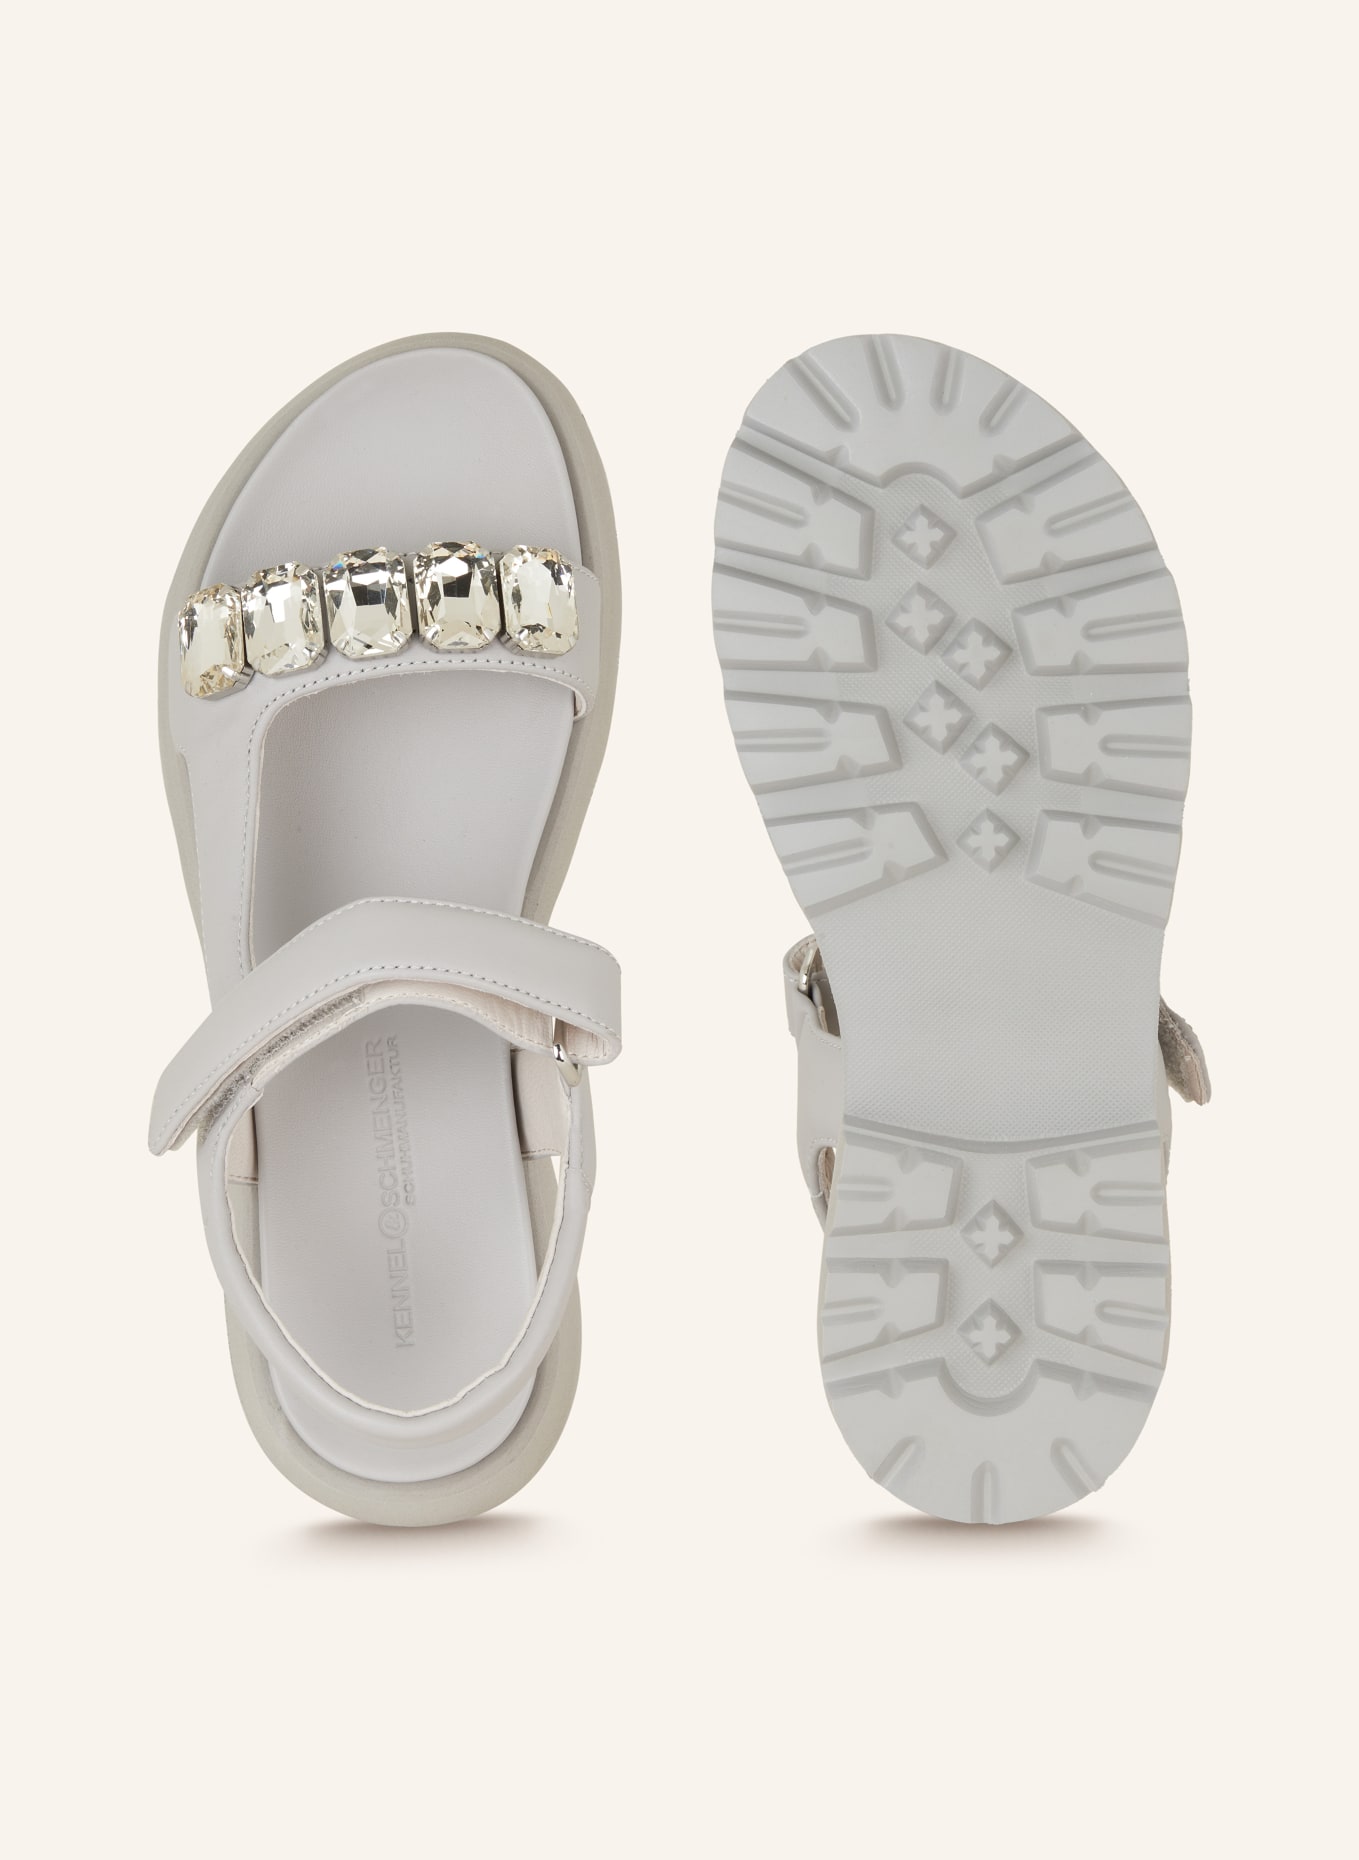 KENNEL & SCHMENGER Sandals SKILL with decorative gems, Color: GRAY (Image 5)